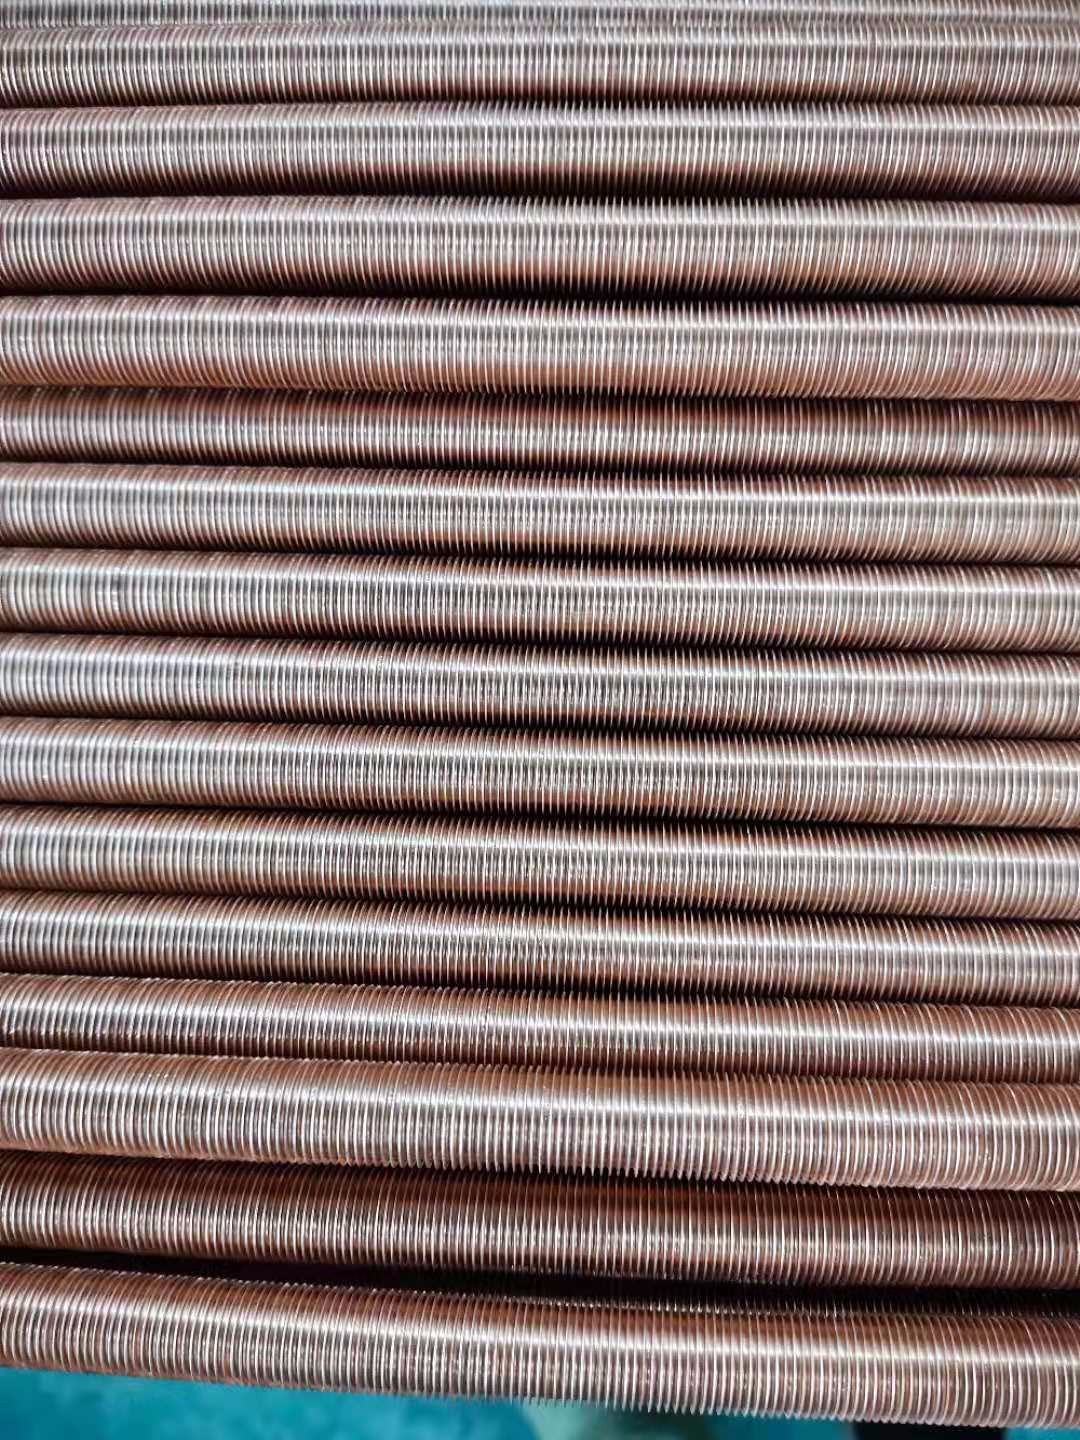 copper low fin tubes